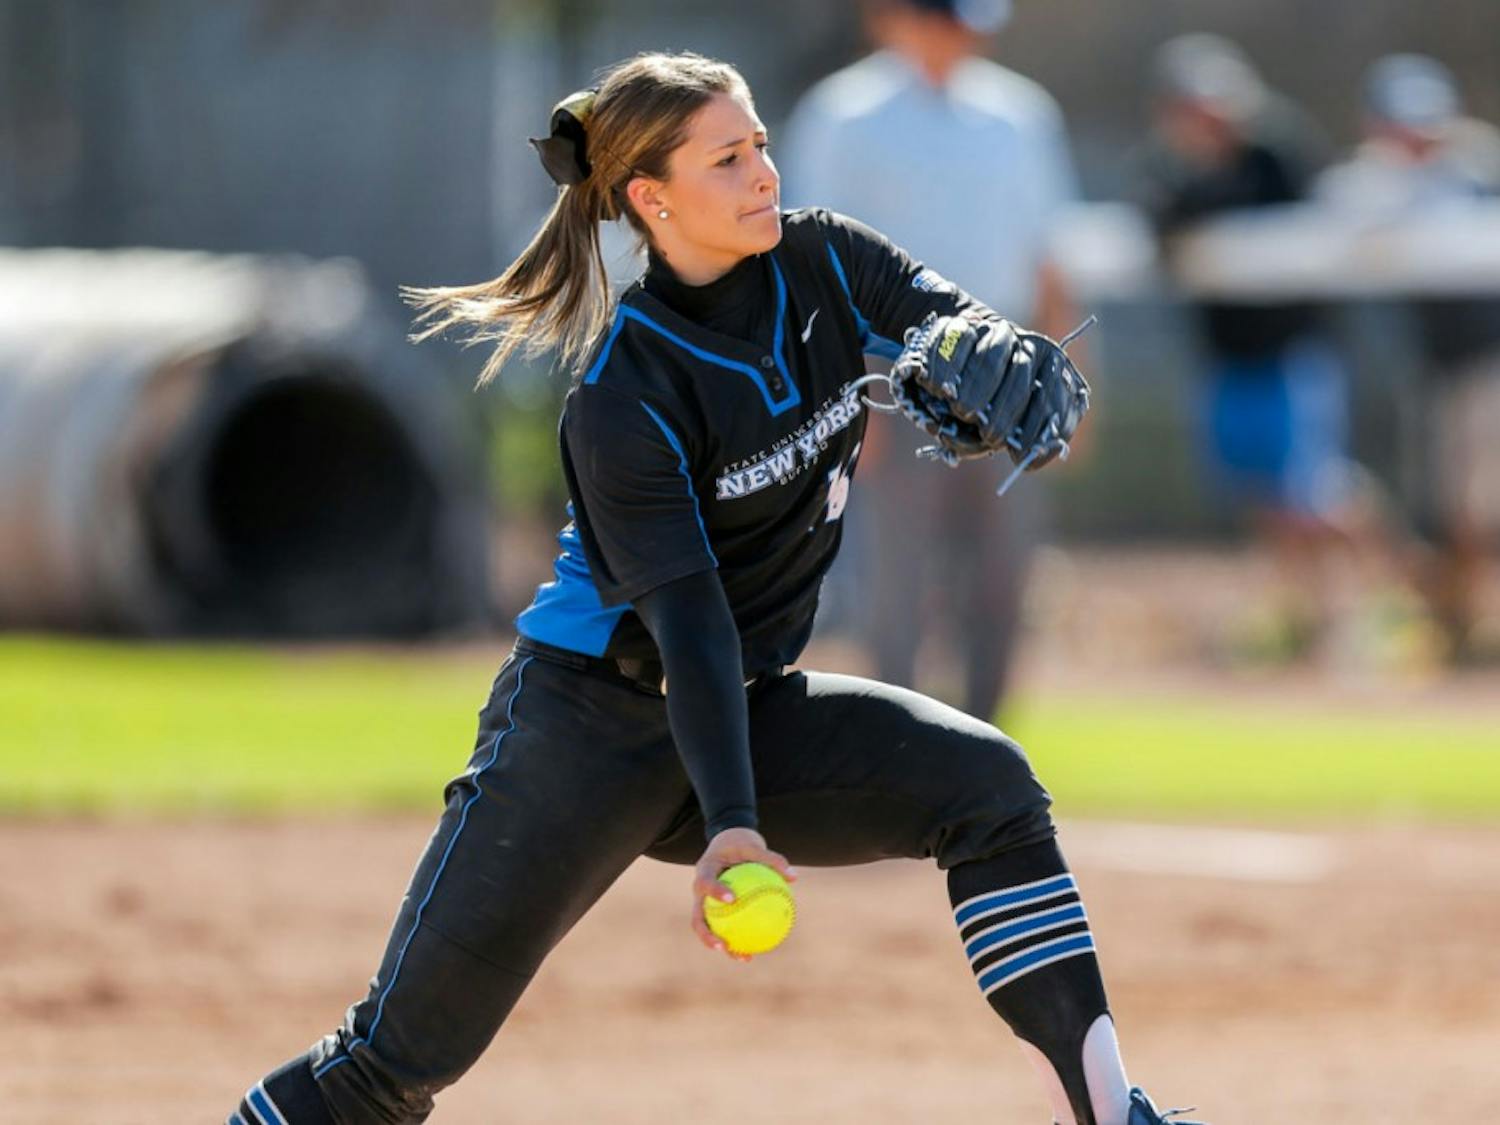 Senior pitcher Hayley Barrow (pictured) throws a pitch as part of her 5.1 innings of work on Sunday as the softball team lost its sixth consecutive game - its longest losing streak of the season.